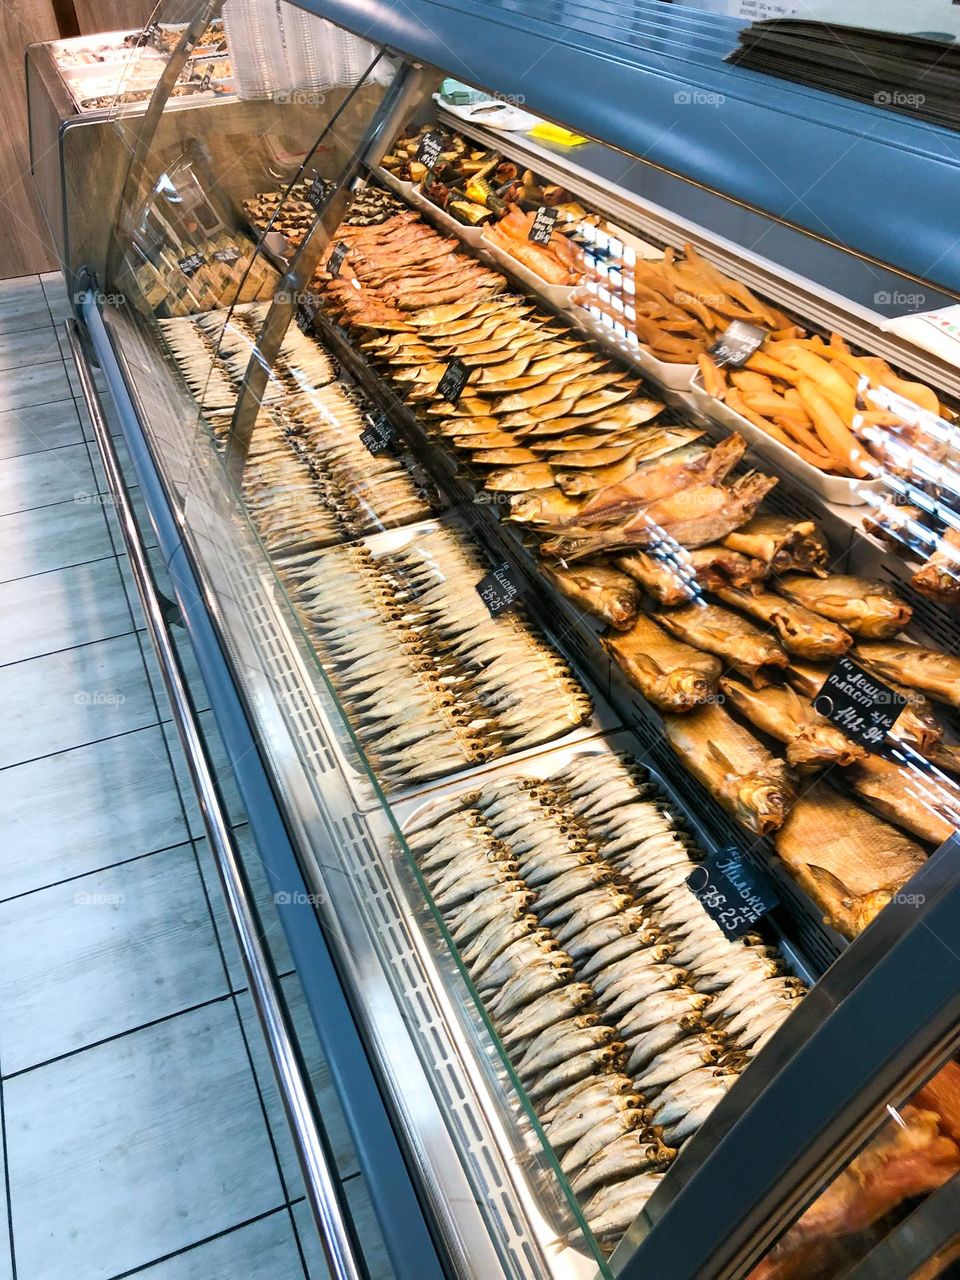 showcase with smoked fish in the store